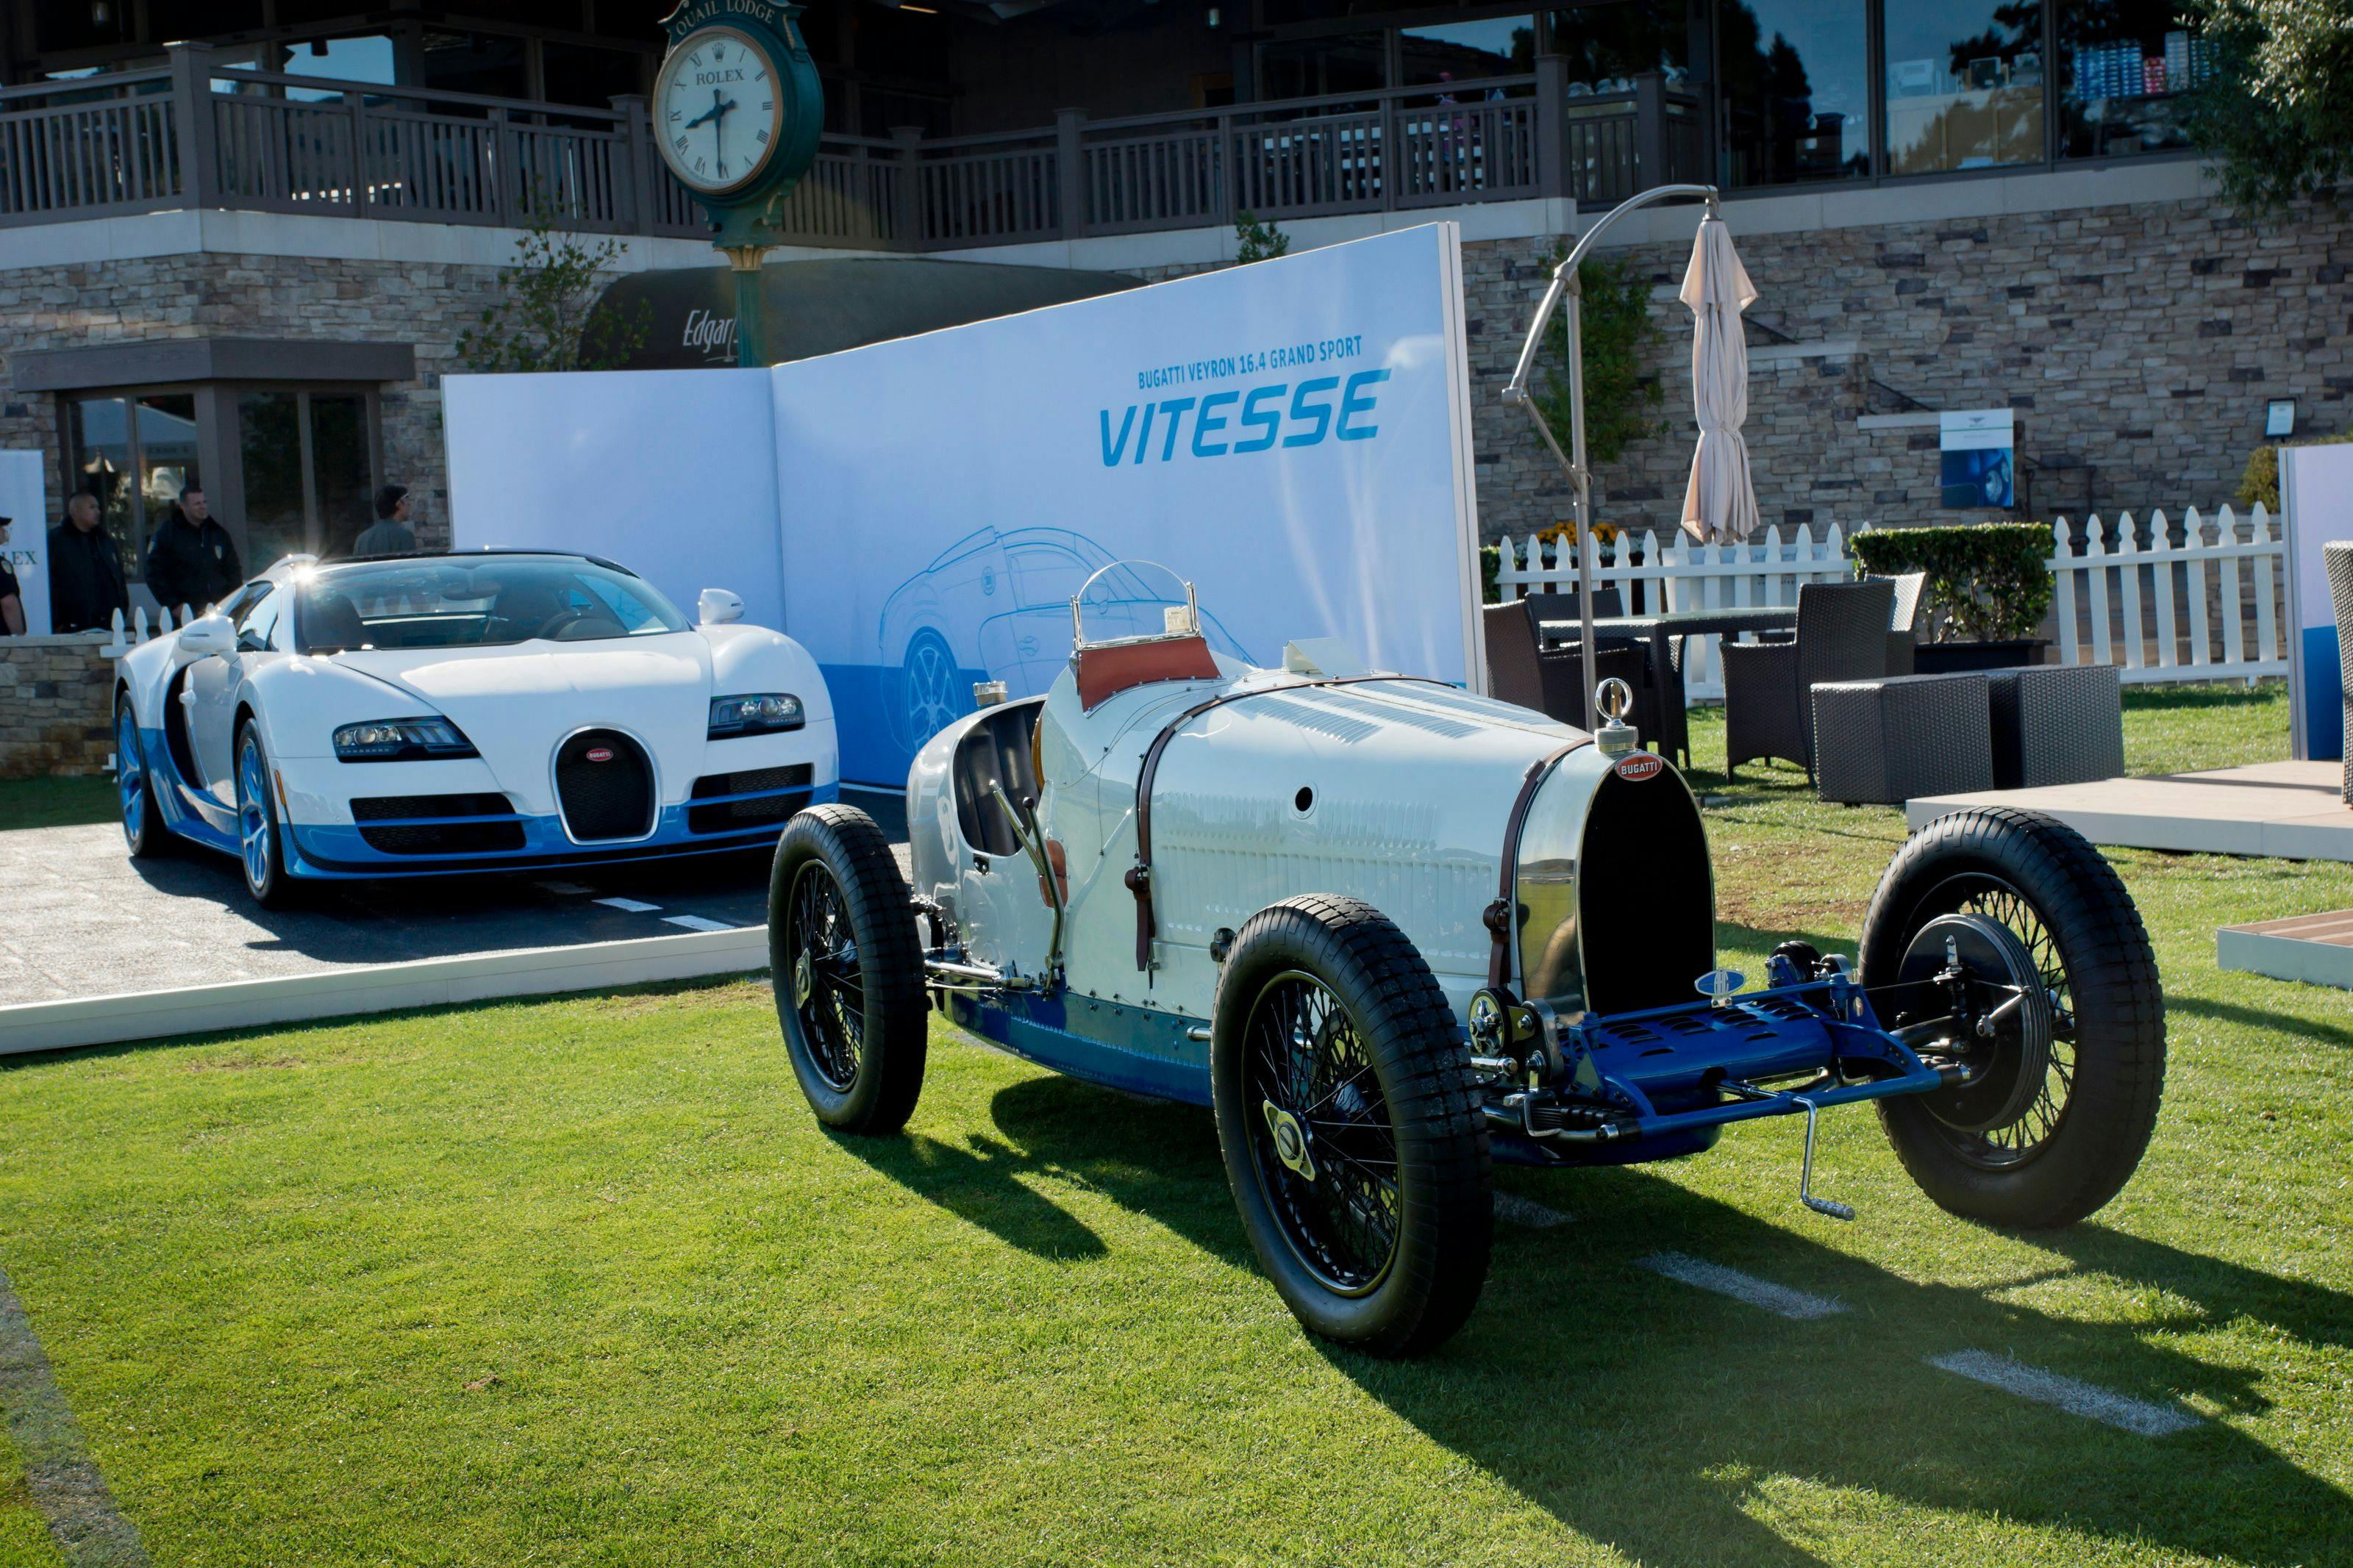 Special Edition Bugatti Veyron 16.4 Grand Sport Vitesse debuts at The Quail: A Motorsports Gathering